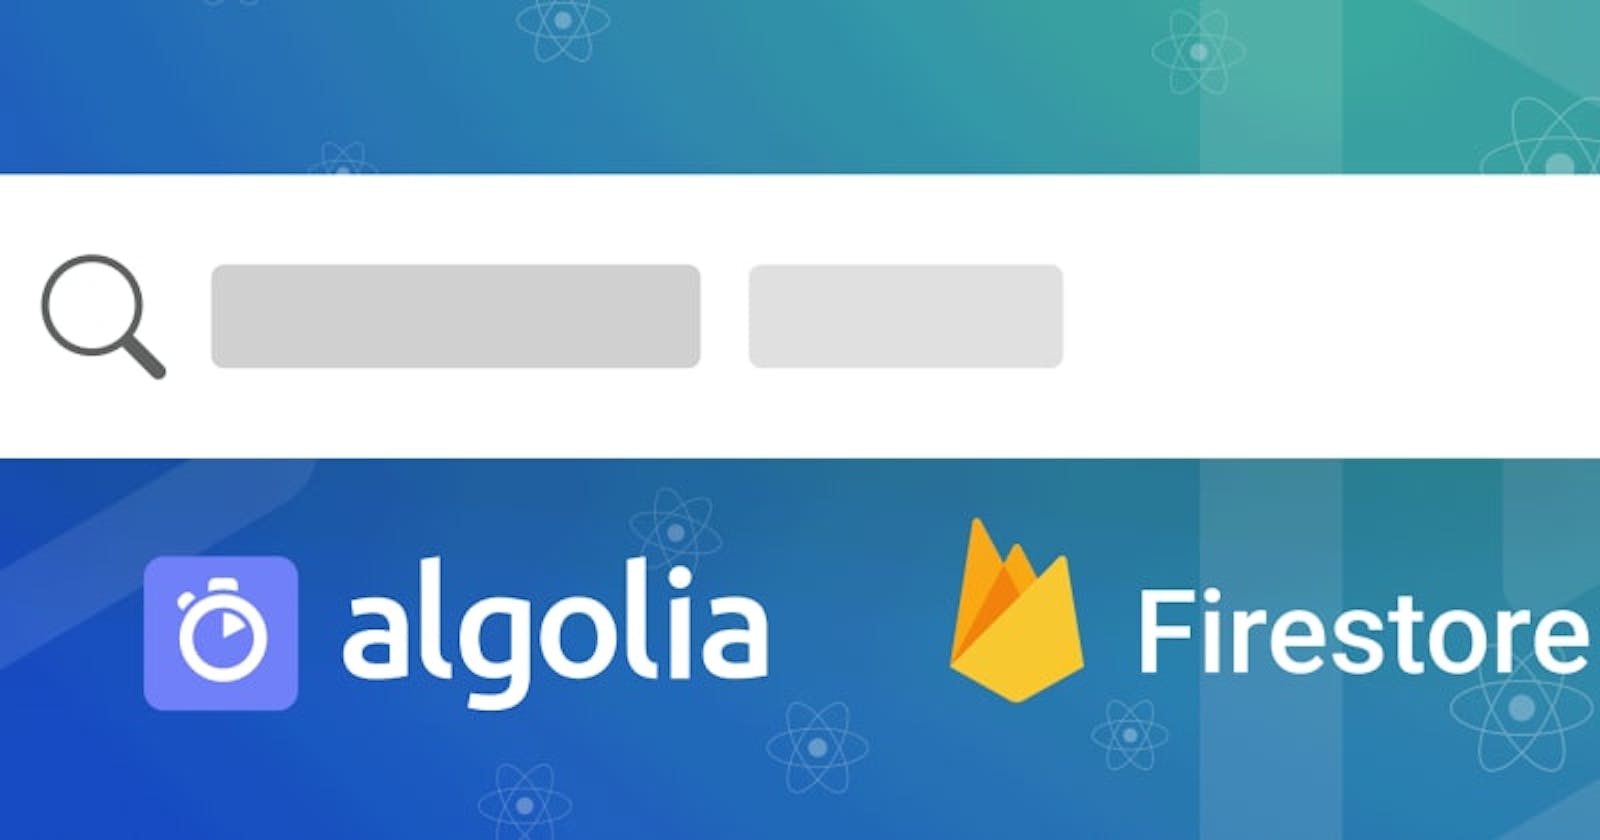 Full-text Search in React with Algolia and Firestore